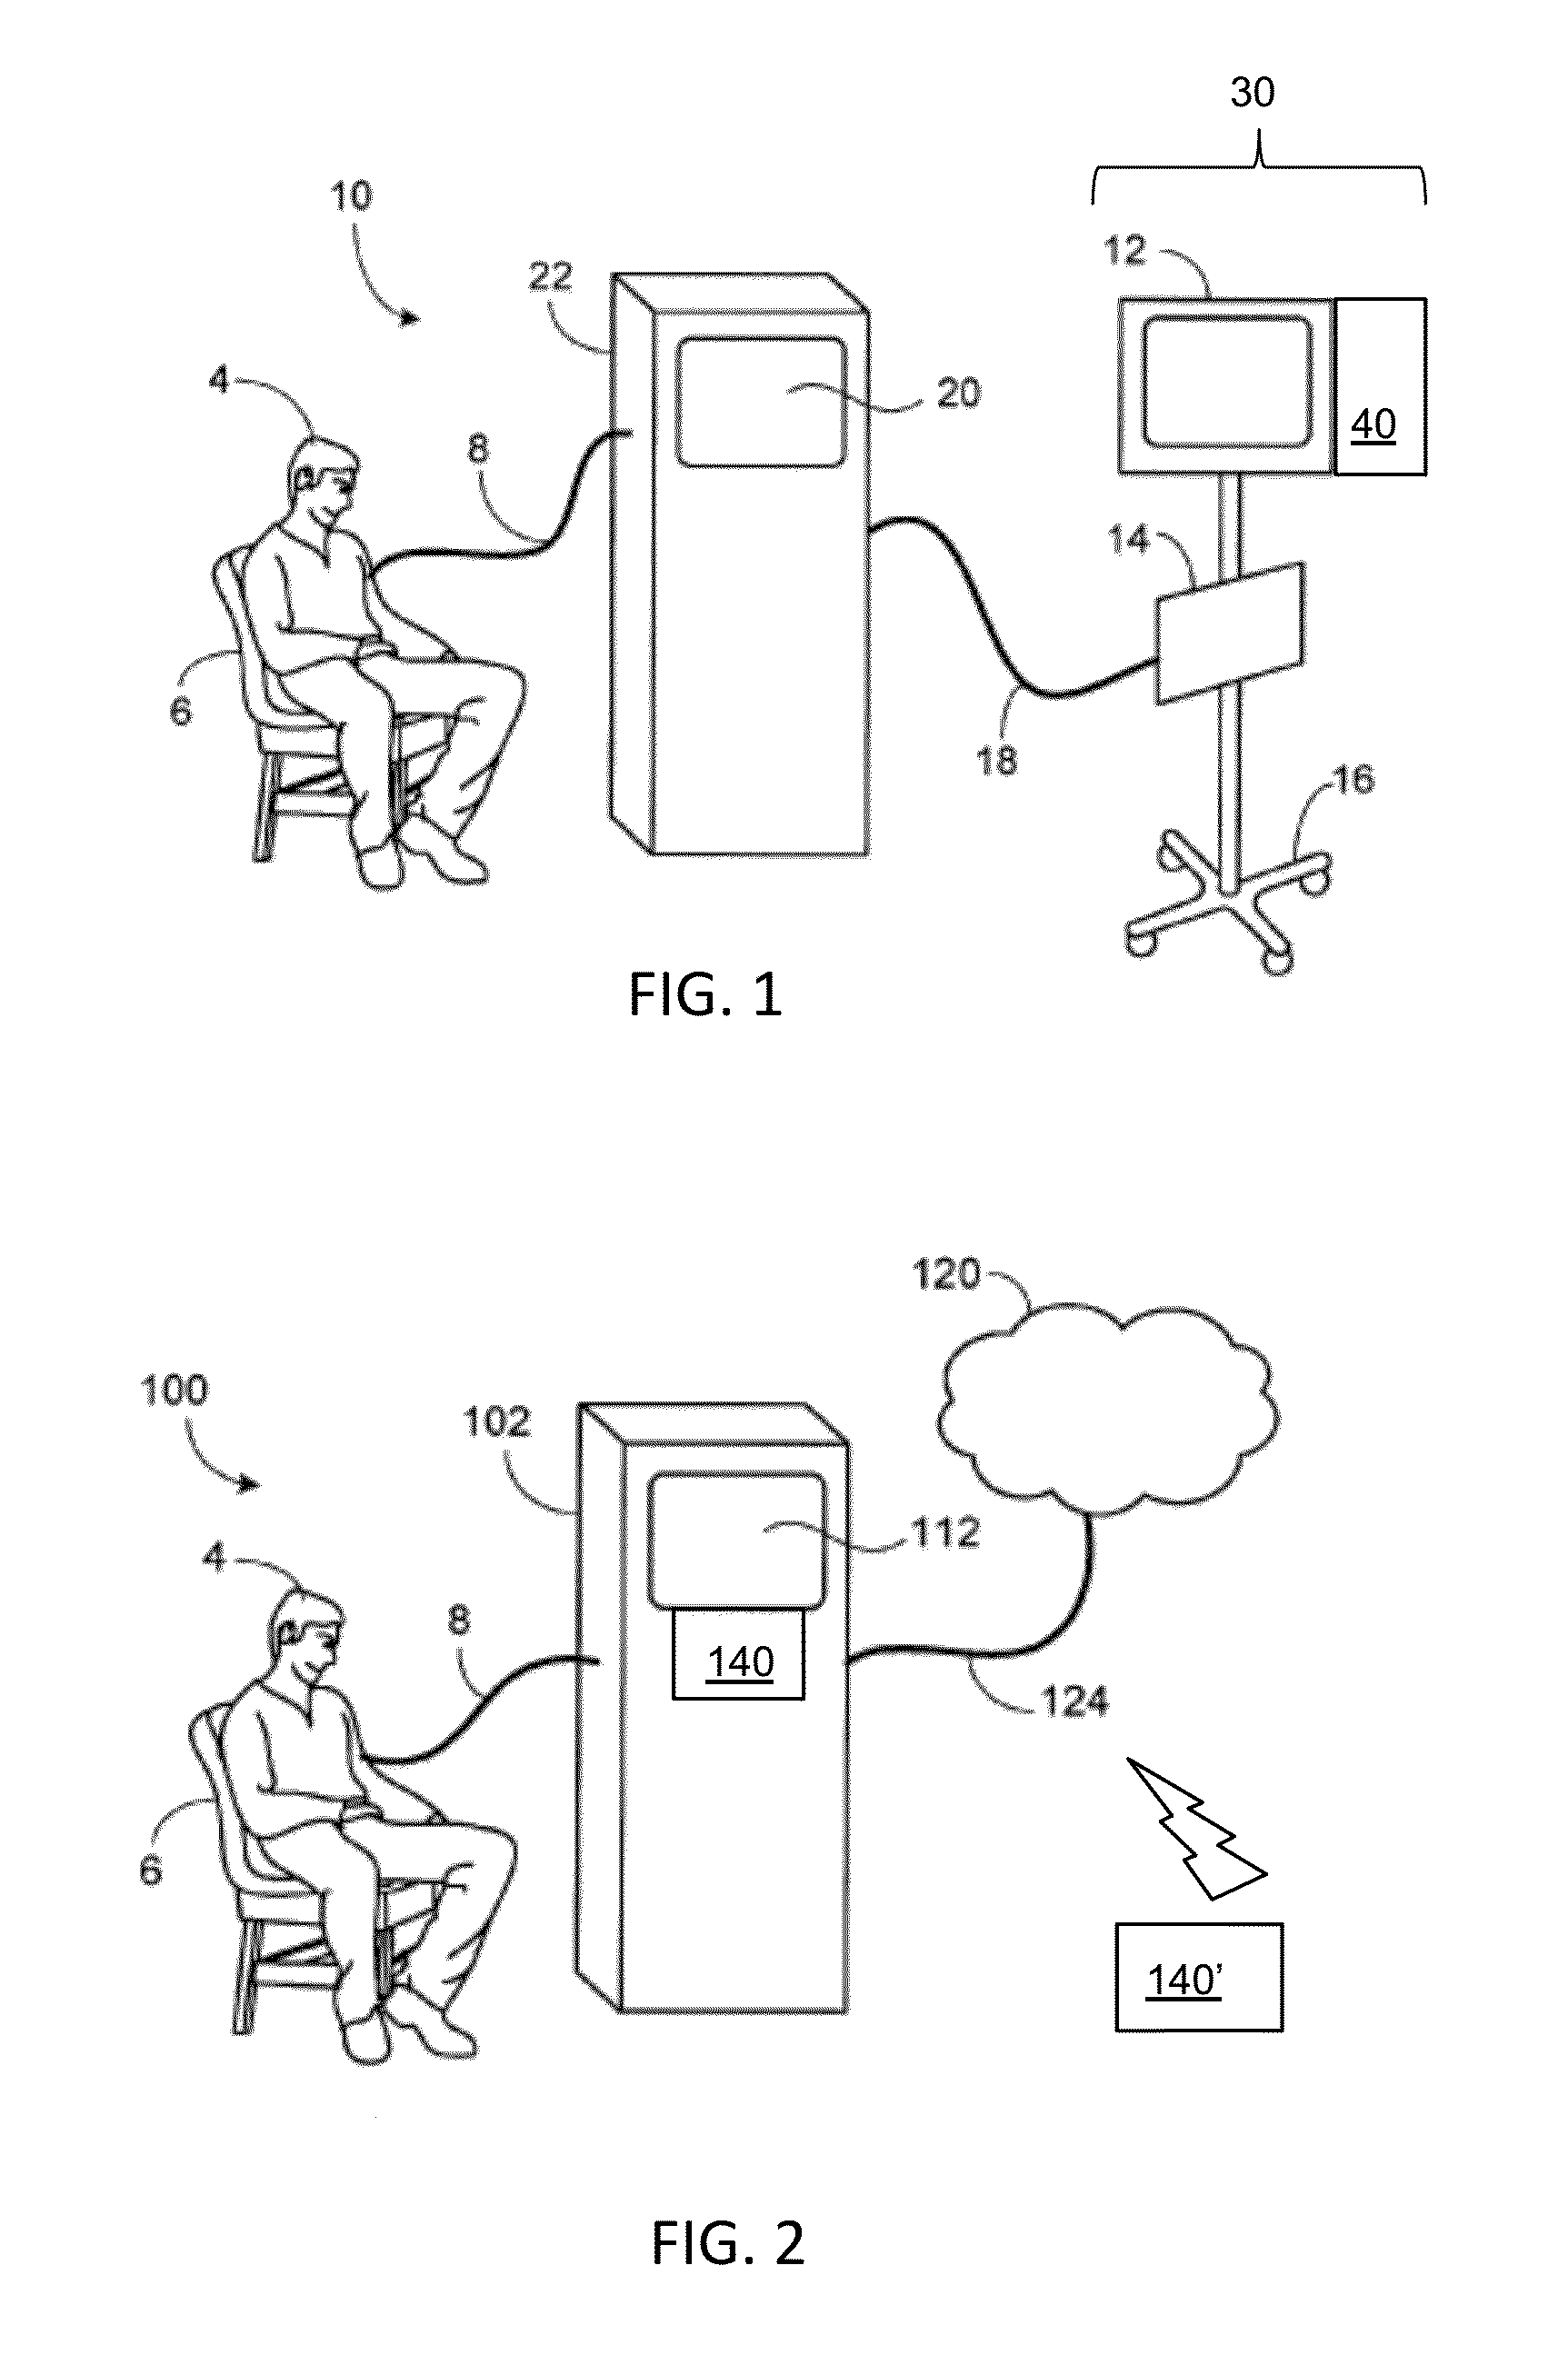 Remote monitoring interface device and mobile application for medical devices